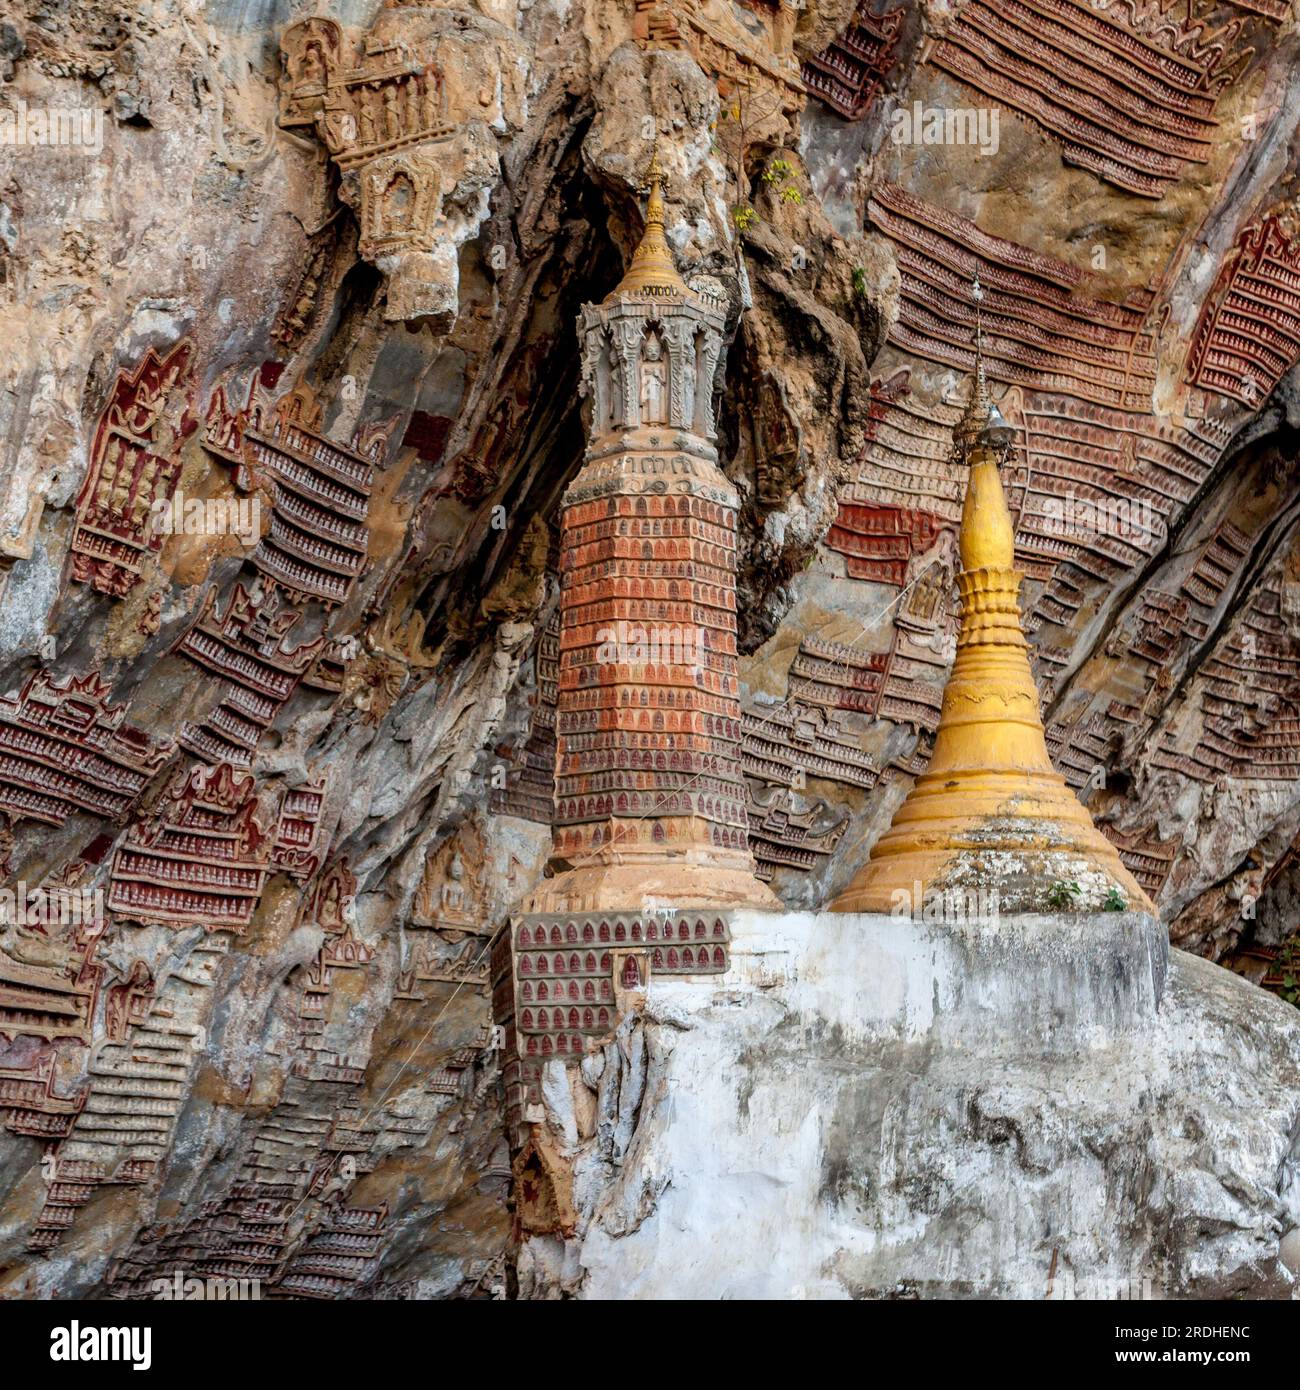 Old buddhist pagoda with carvings in Kaw Goon cave, Myanmar. Stock Photo